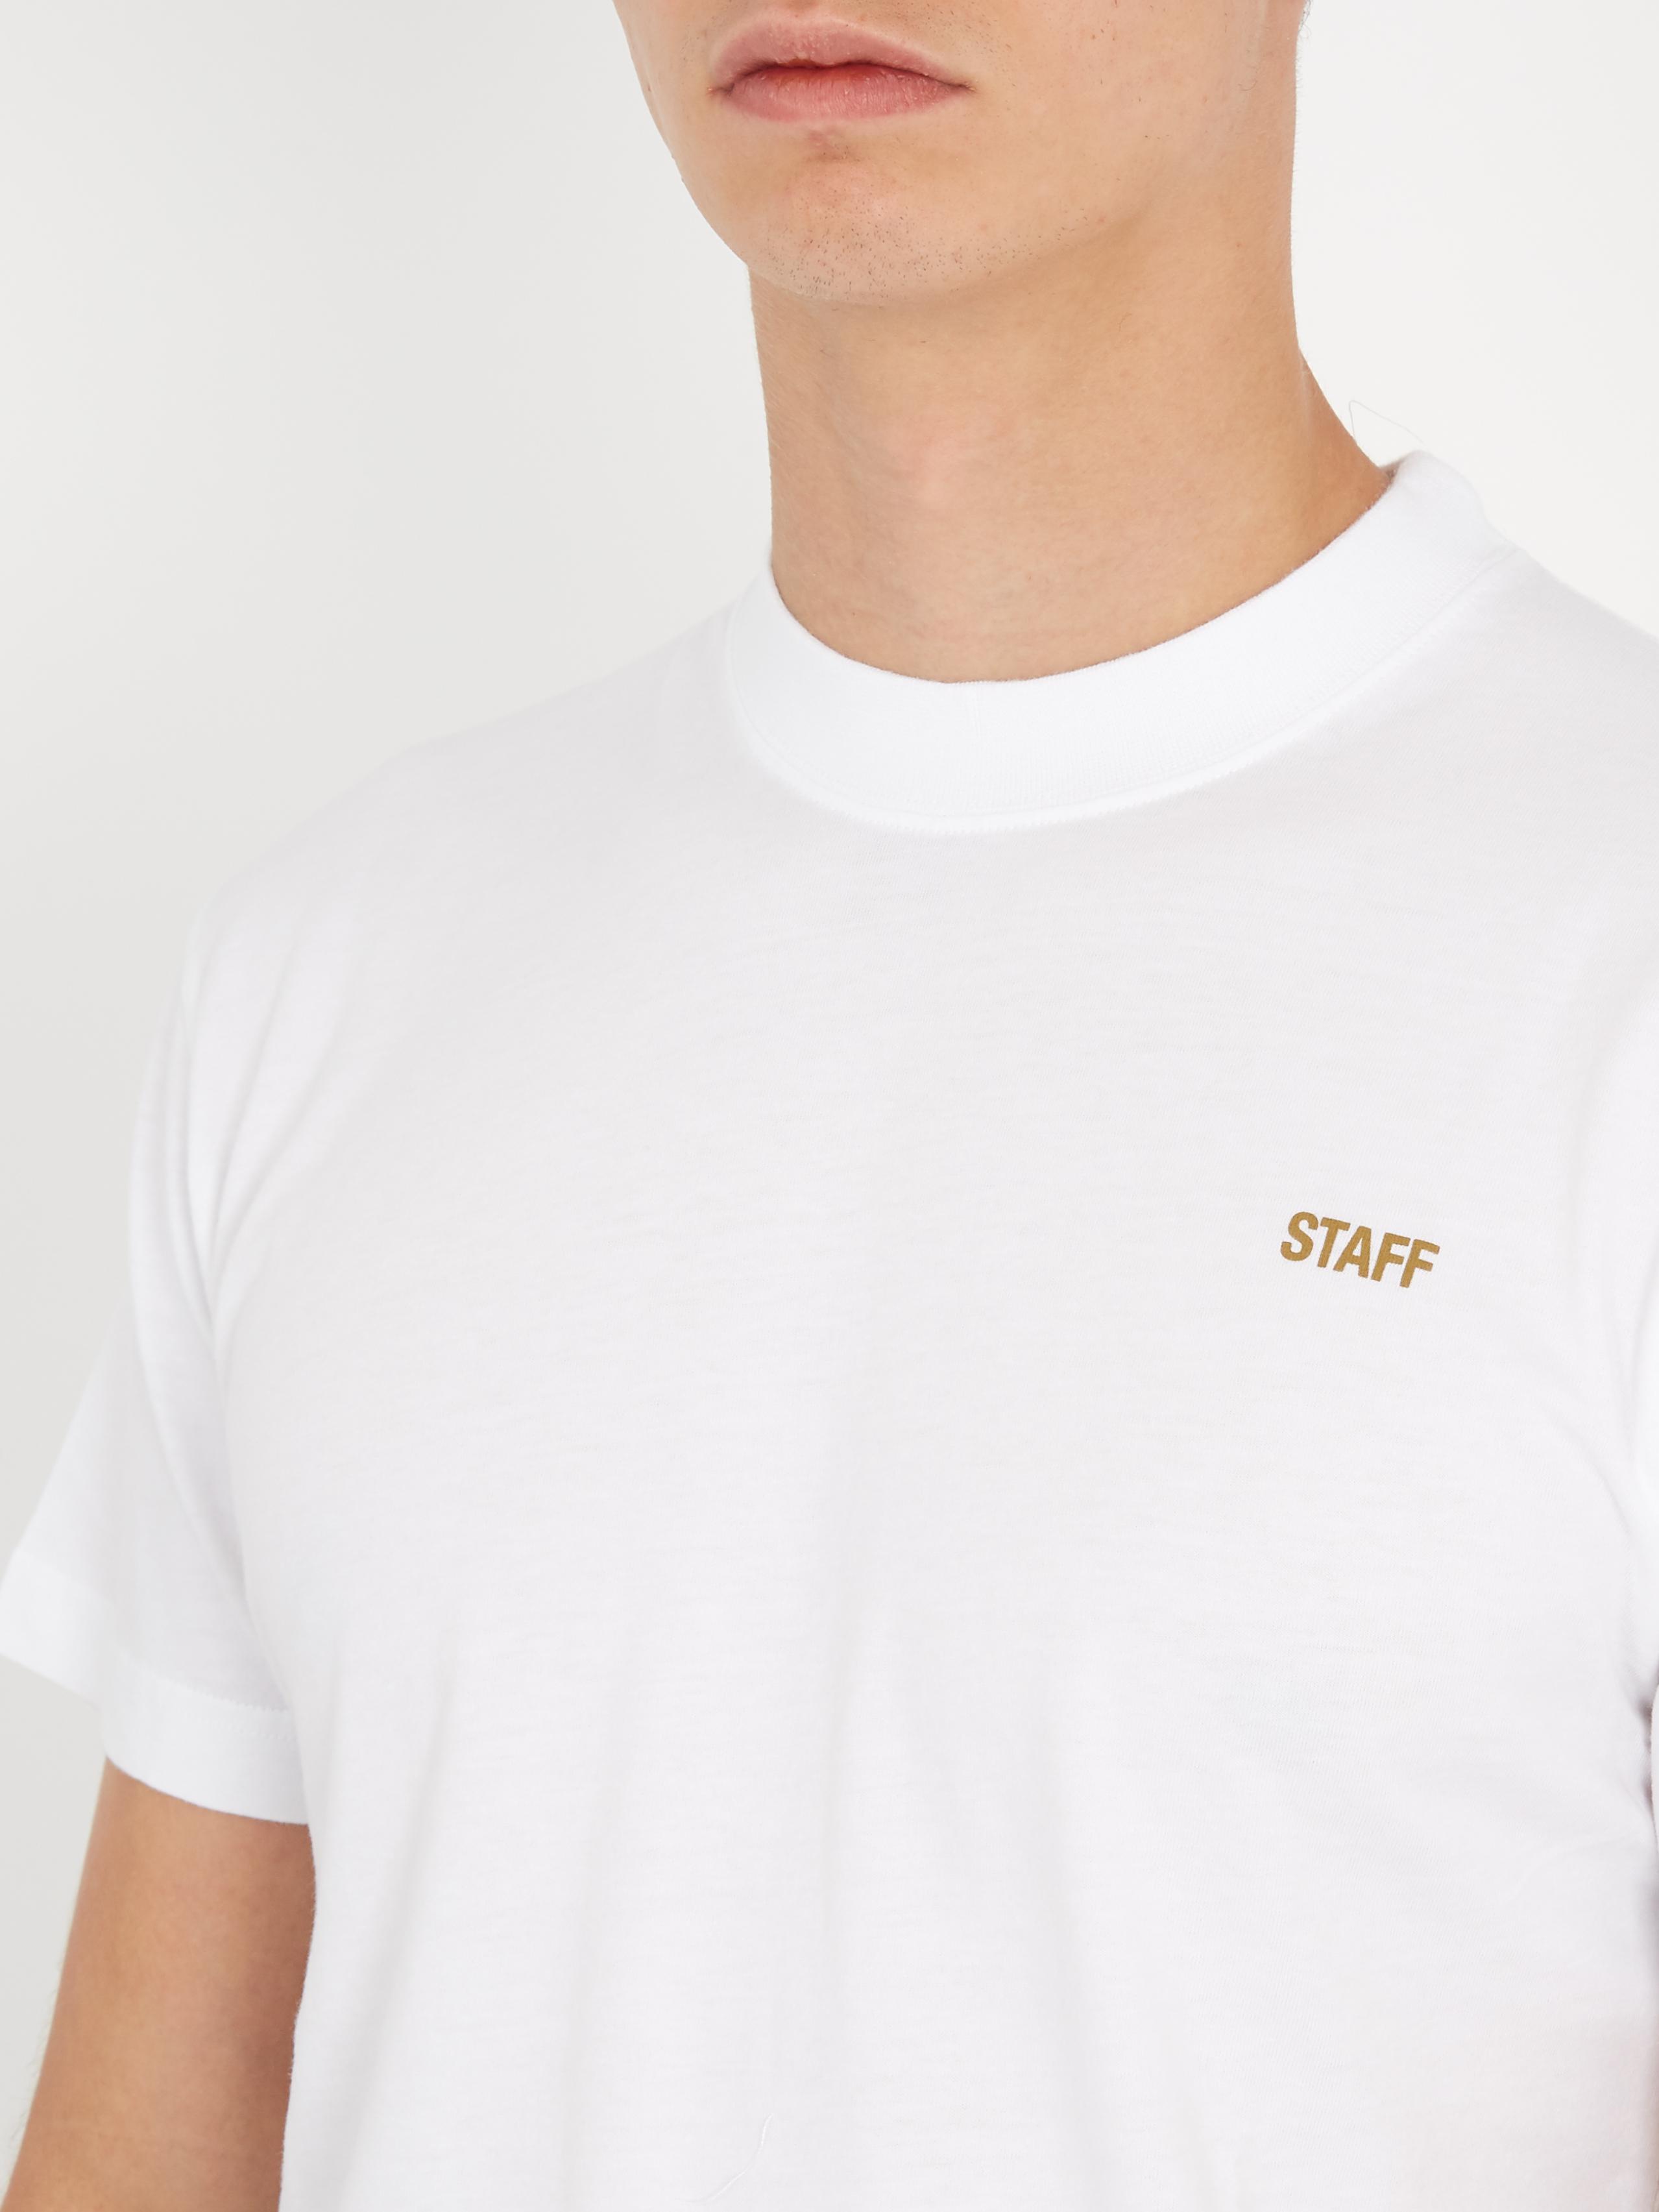 Vetements Staff Cotton T shirt in White for Men   Lyst